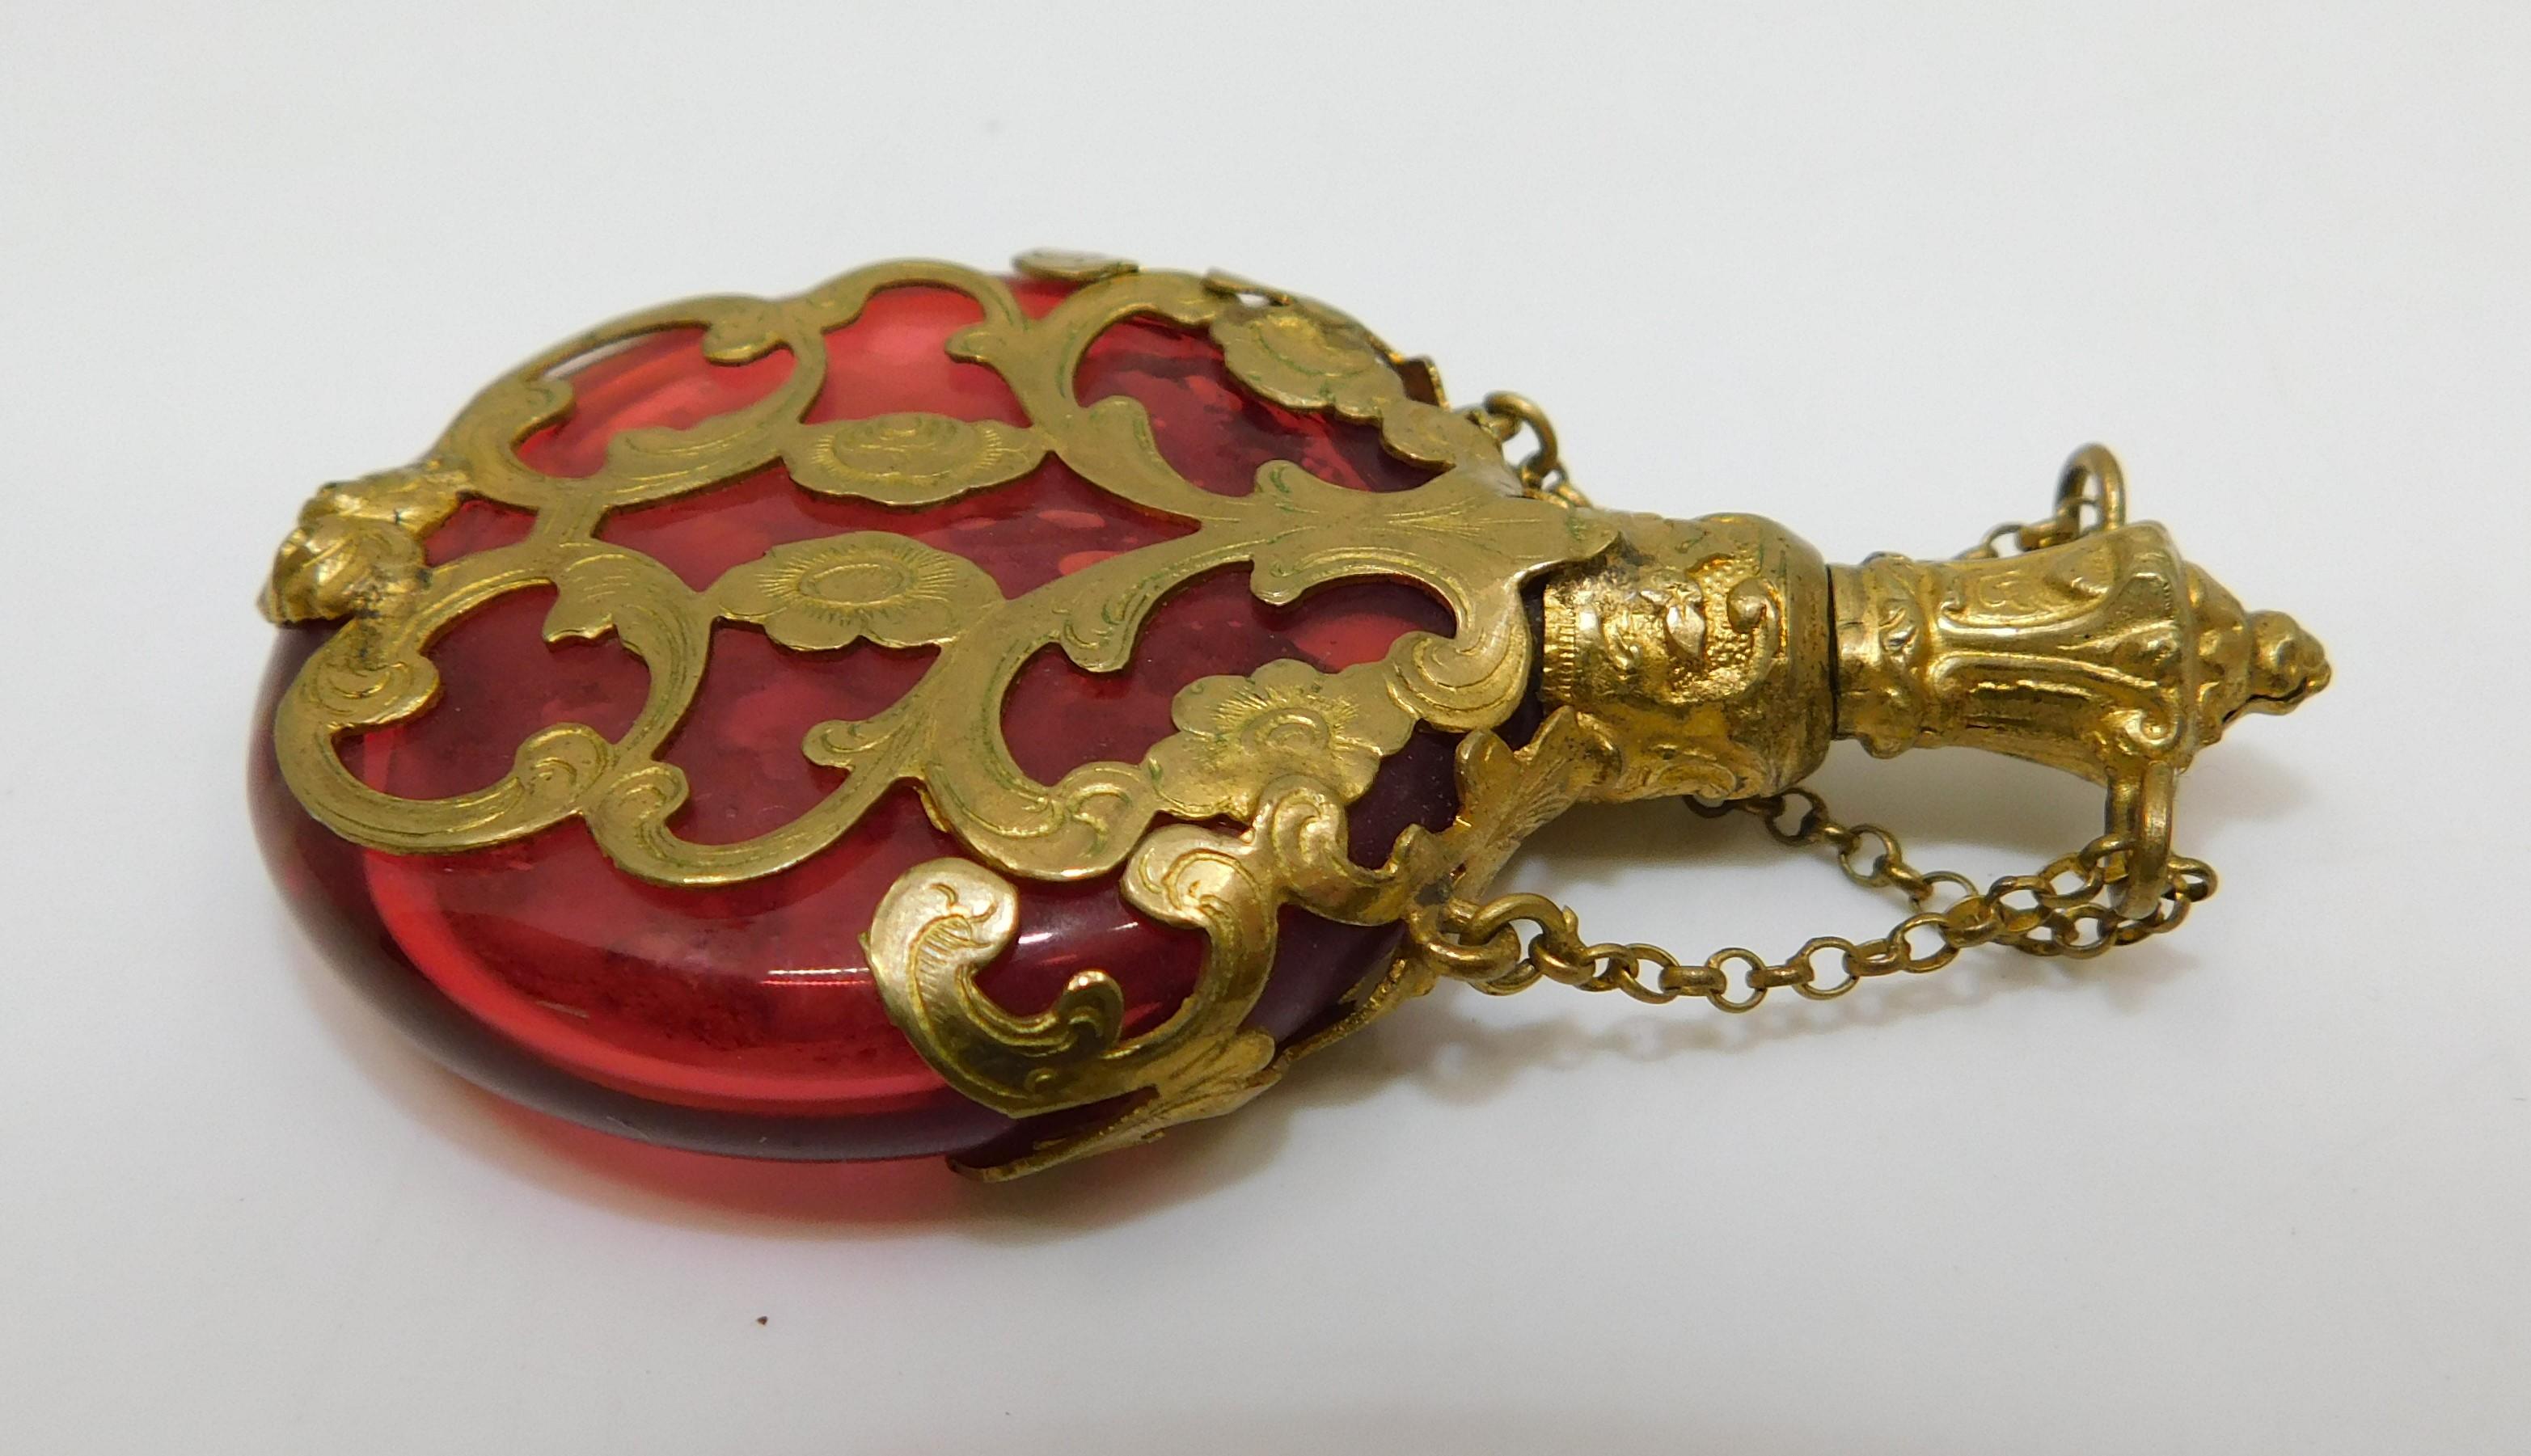 Antique Cranberry Glass Chatelaine Perfume Bottle with Gold Filigree Circa 1880 For Sale 1